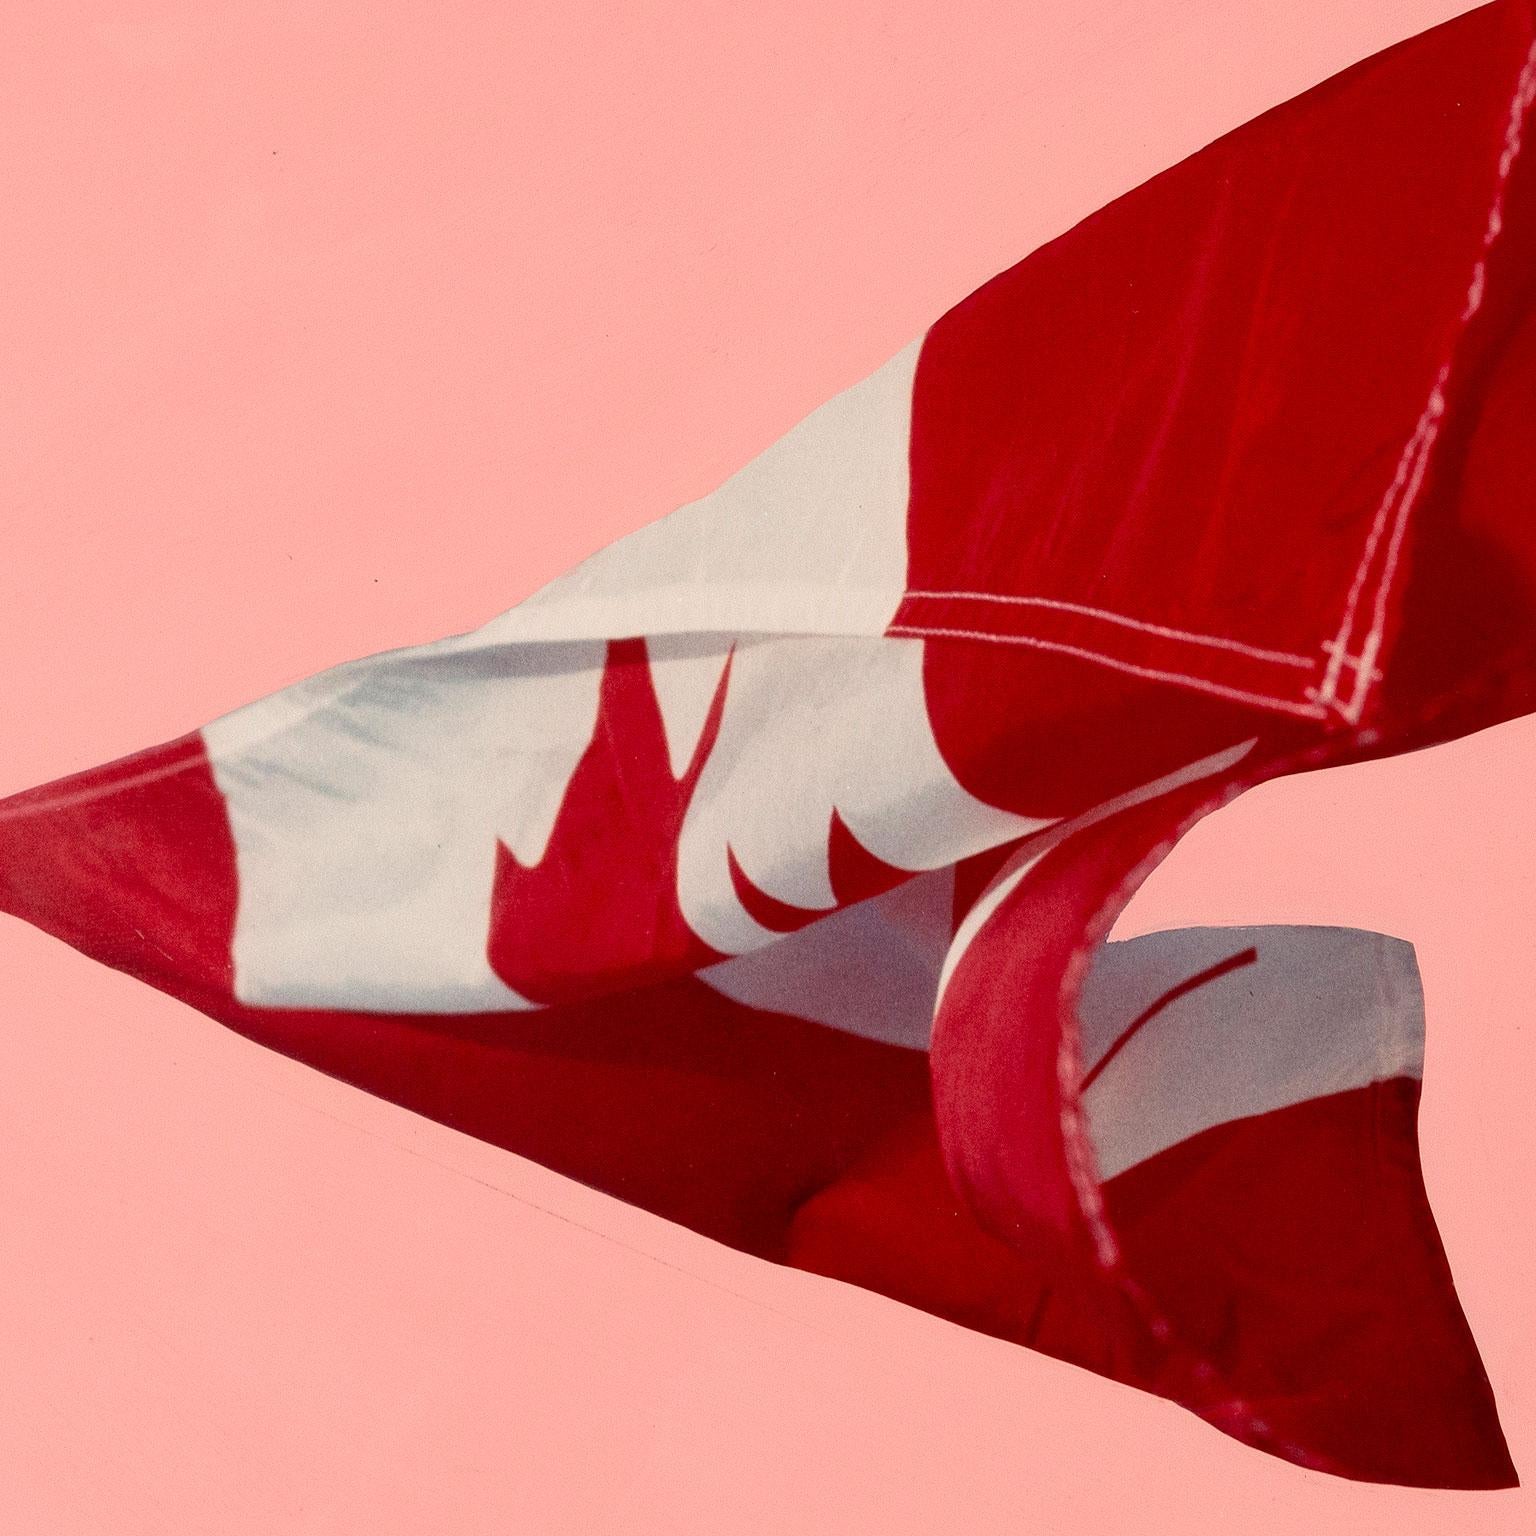 In the Spring of 1981, Charles Pachter began working on his most iconic and celebrated series: the Painter Flag.

Decades before Photoshop, Pachter went around Toronto taking photos of Canadian flags in the wind.

Before he finalized the